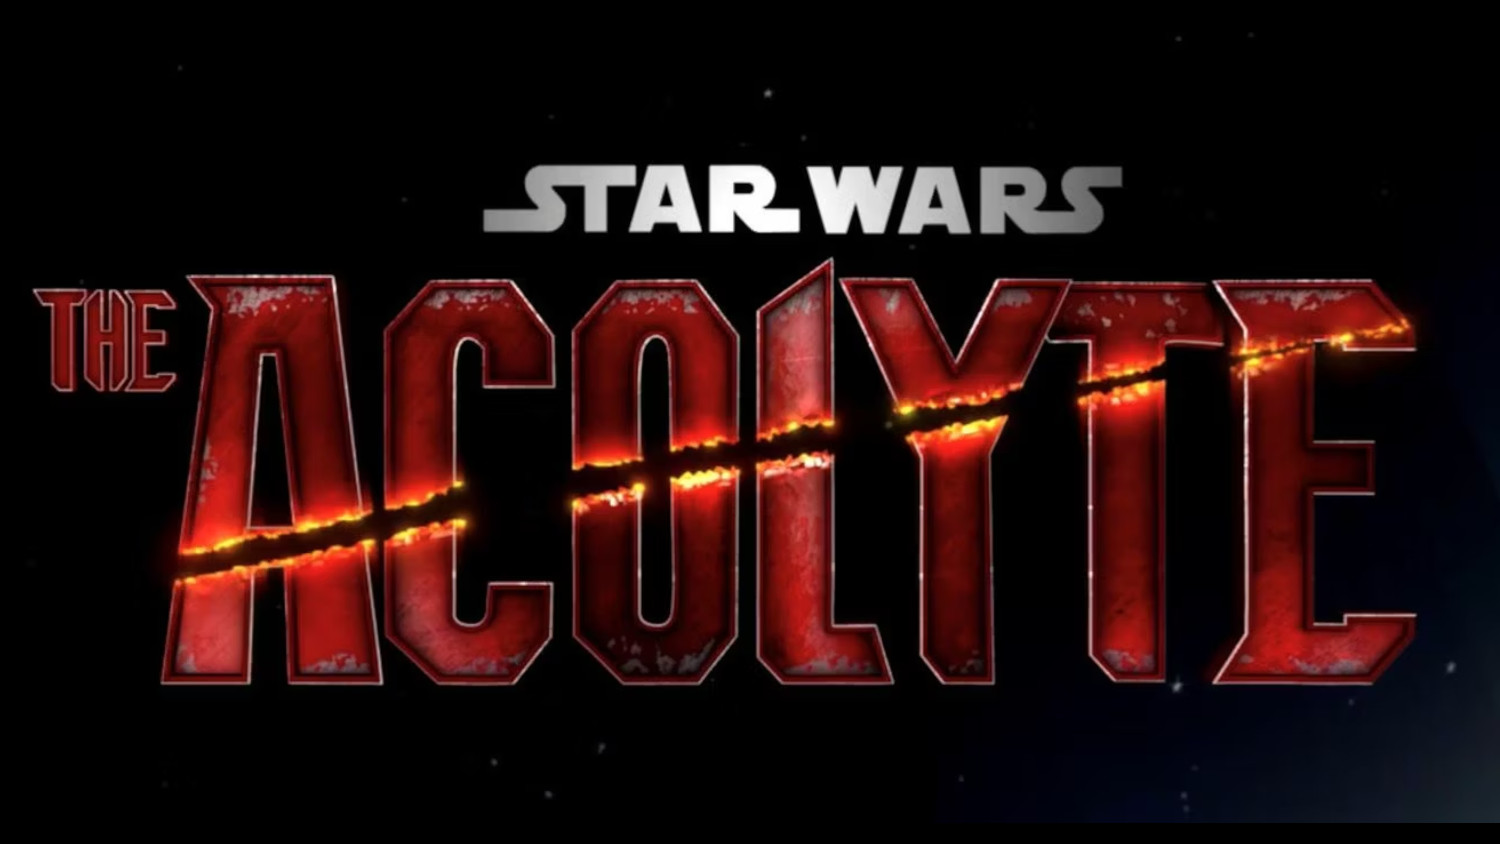 star wars acolyte poster trailer release date